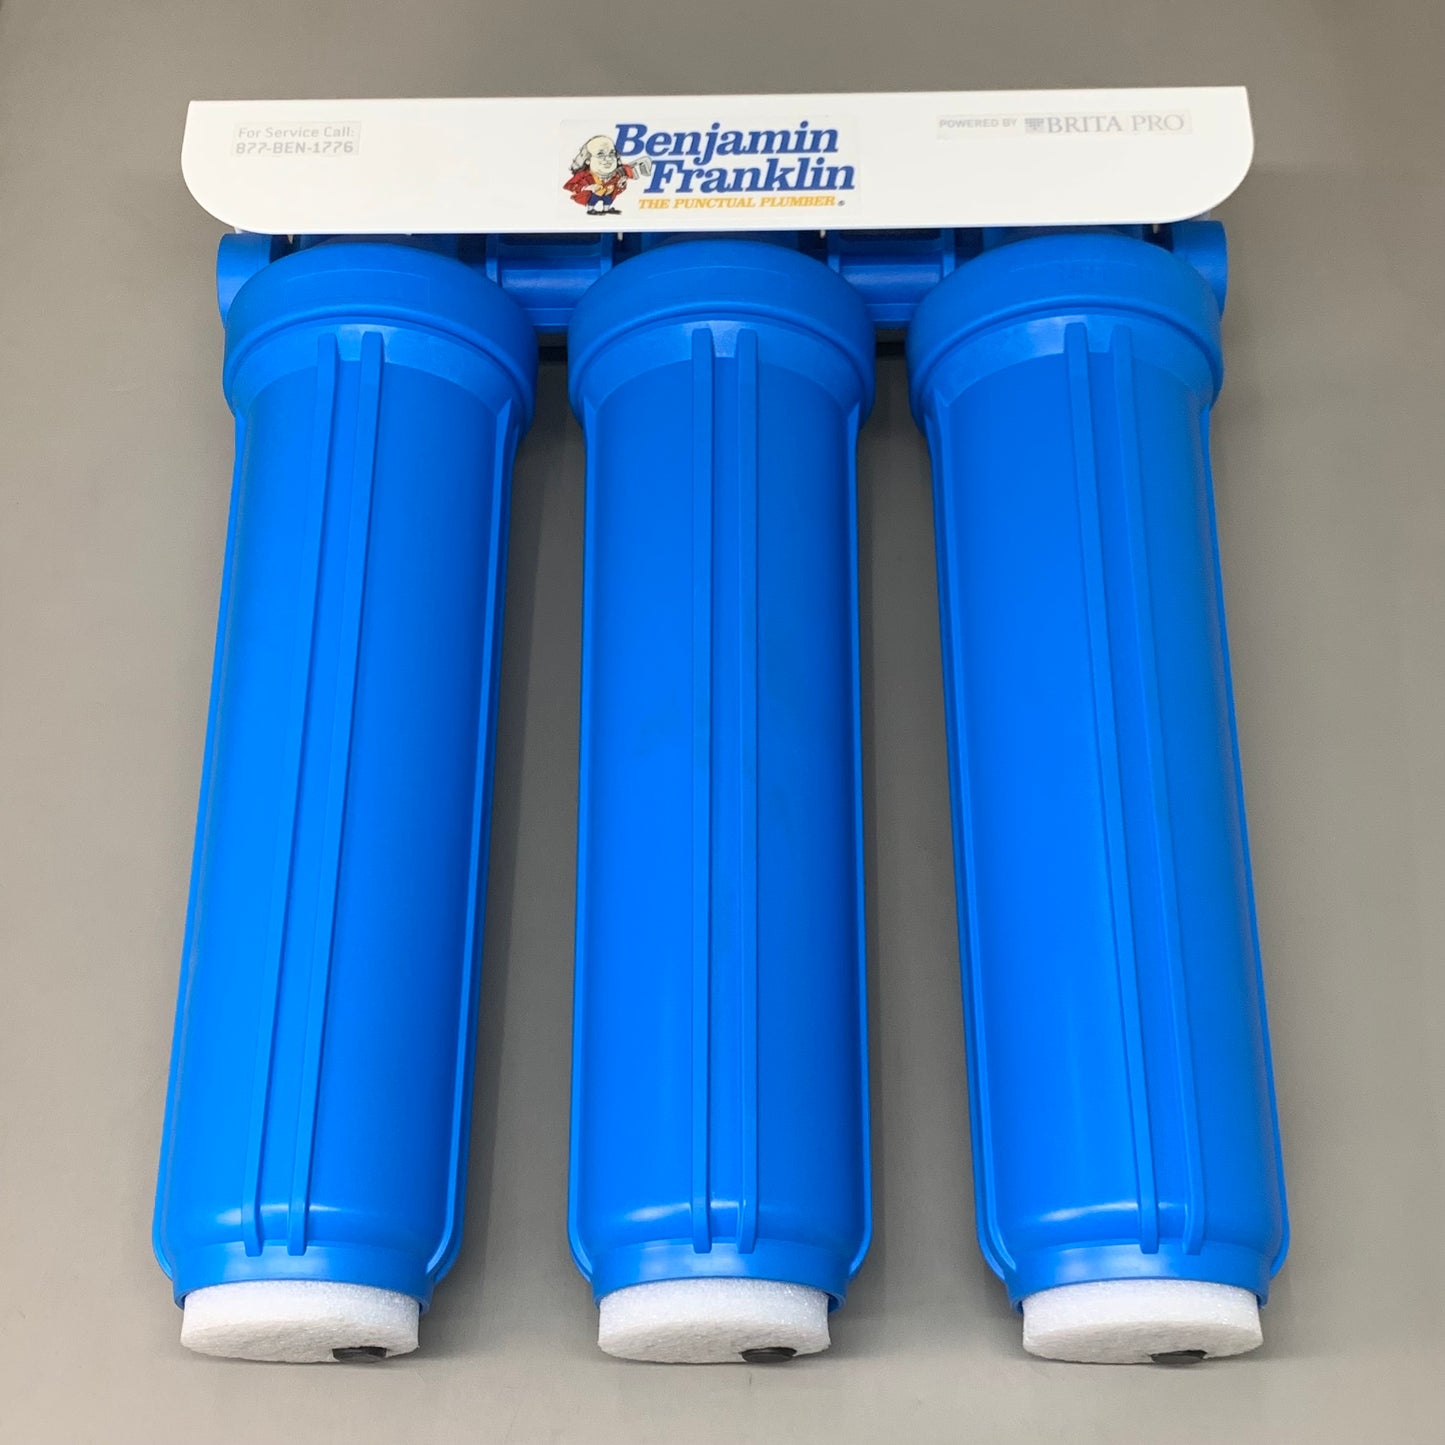 BRITA PRO Benjamin Franklin 3 Stage Whole House Water Filter System W/ 3 20" Filters